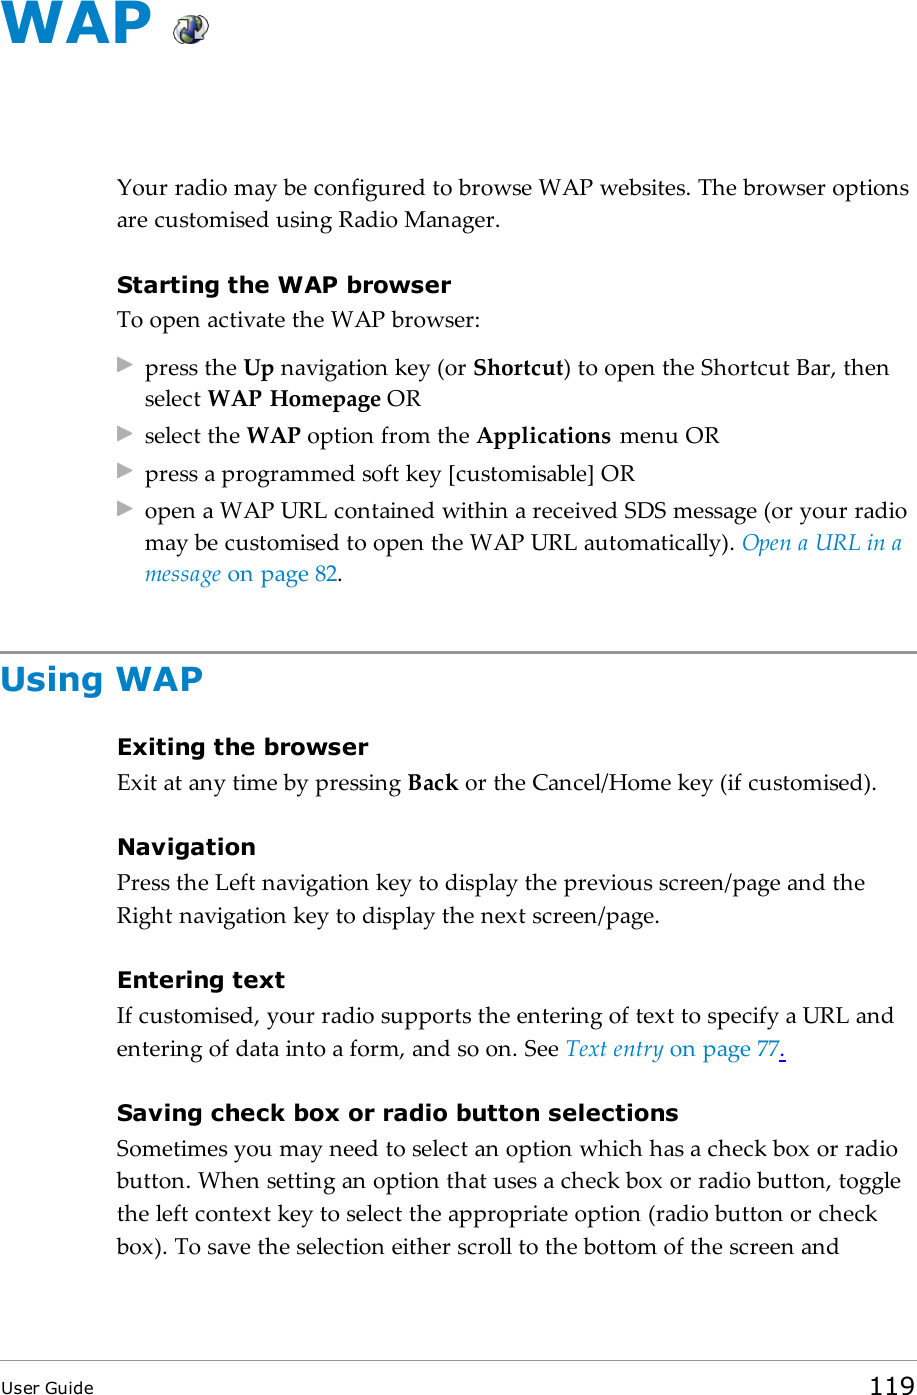 WAPYour radio may be configured to browse WAP websites. The browser optionsare customised using Radio Manager.Starting the WAP browserTo open activate the WAP browser:press the Up navigation key (or Shortcut) to open the Shortcut Bar, thenselect WAP Homepage ORselect the WAP option from the Applications menu ORpress a programmed soft key [customisable] ORopen a WAPURL contained within a received SDSmessage (or your radiomay be customised to open the WAP URLautomatically). Open a URL in amessage on page82.Using WAPExiting the browserExit at any time by pressing Back or the Cancel/Home key (if customised).NavigationPress the Left navigation key to display the previous screen/page and theRight navigation key to display the next screen/page.Entering textIf customised, your radio supports the entering of text to specify a URL andentering of data into a form, and so on. See Text entry on page77.Saving check box or radio button selectionsSometimes you may need to select an option which has a check box or radiobutton. When setting an option that uses a check box or radio button, togglethe left context key to select the appropriate option (radio button or checkbox). To save the selection either scroll to the bottom of the screen andUser Guide 119